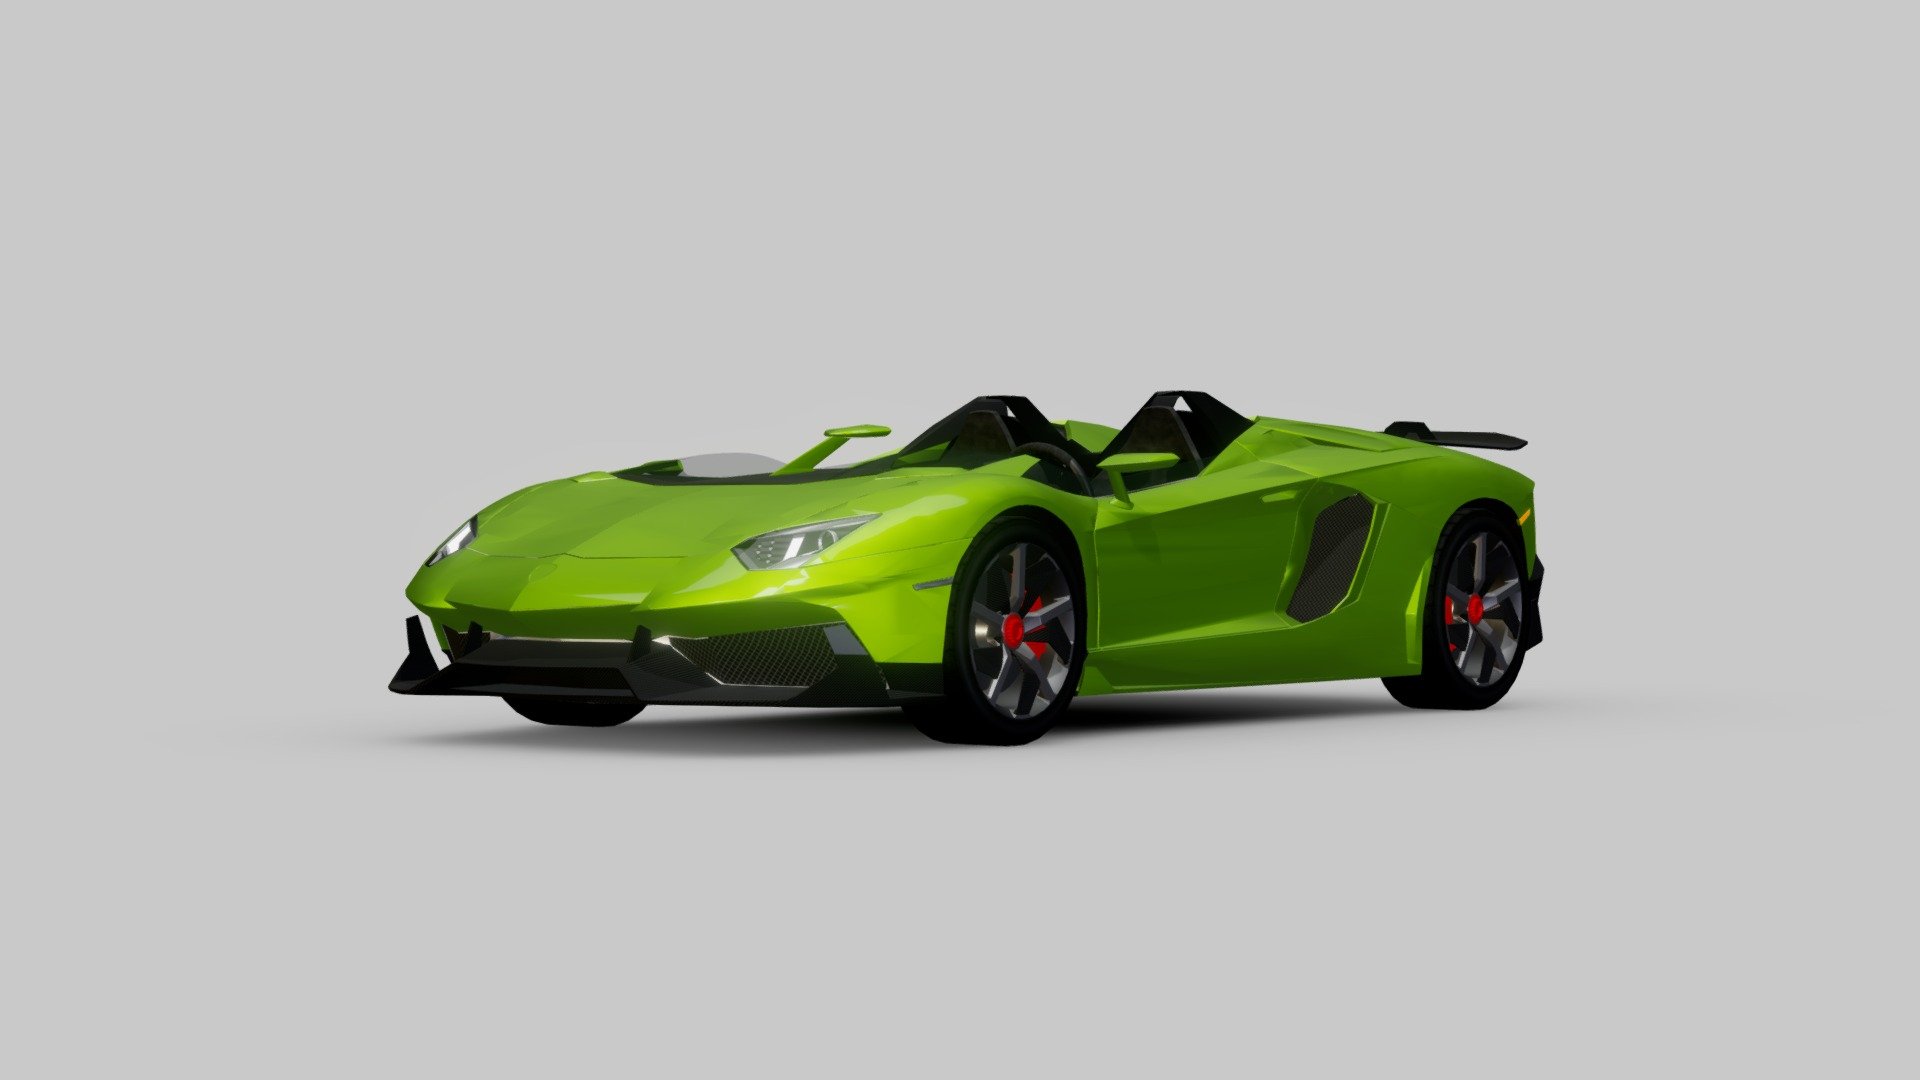 A low poly model of the Lamborghini Aventador J supercar.

Original model by ztrztr: https://sketchfab.com/3d-models/aventador-eb65aa9ae997464e981e258d91b1161b

I added the wheels, the rims, and the engine. And textured the interior as well 3d model